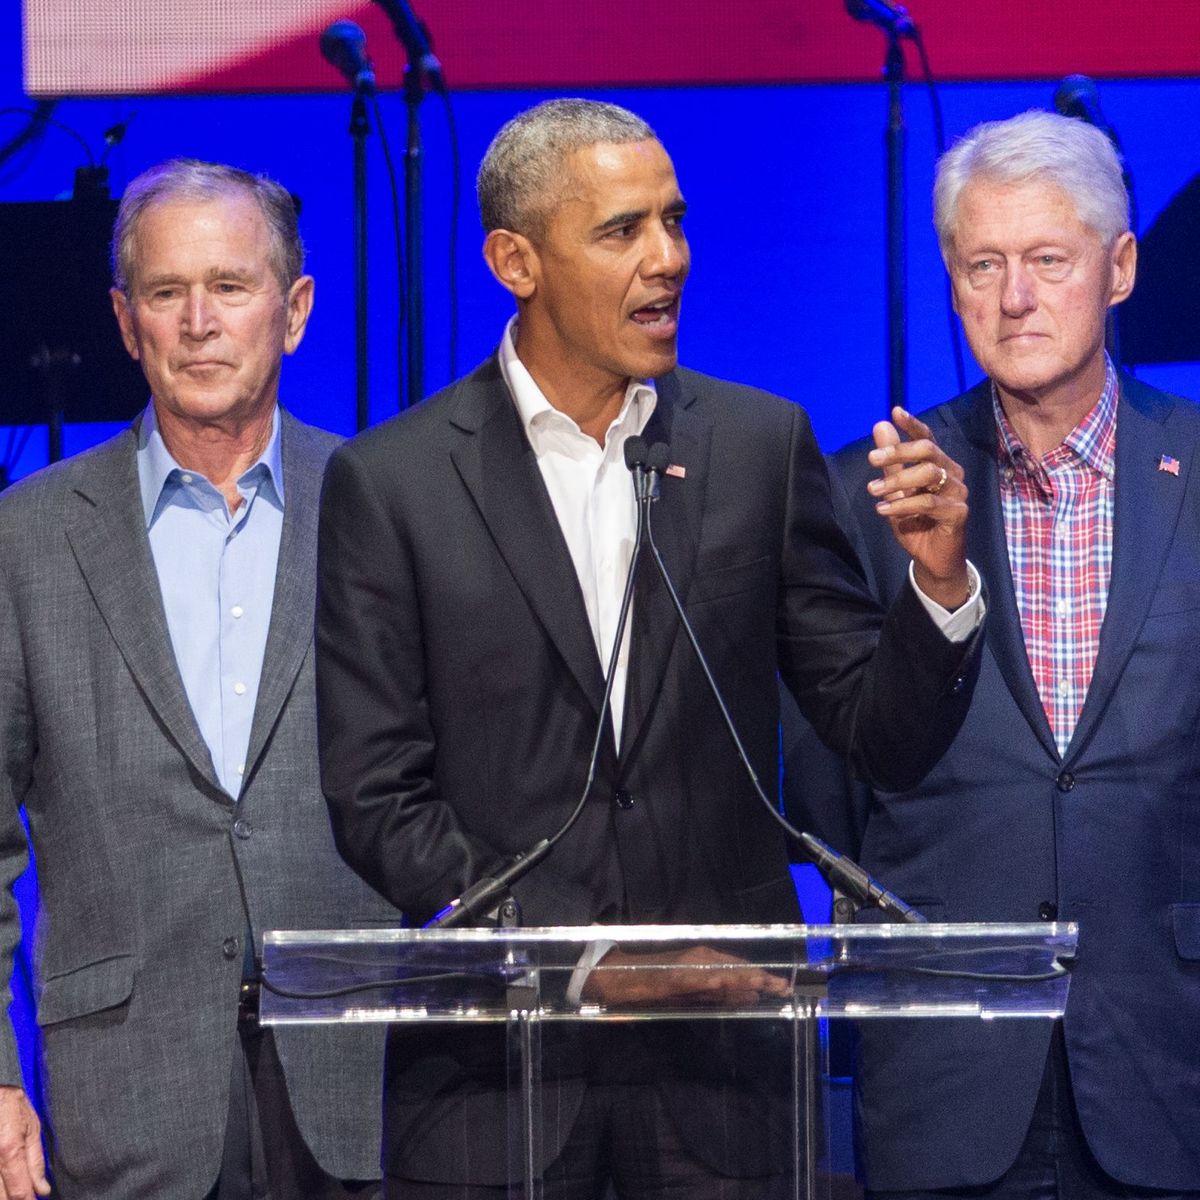 Read: Obama, Bush, and Carter on George Floyd Protests